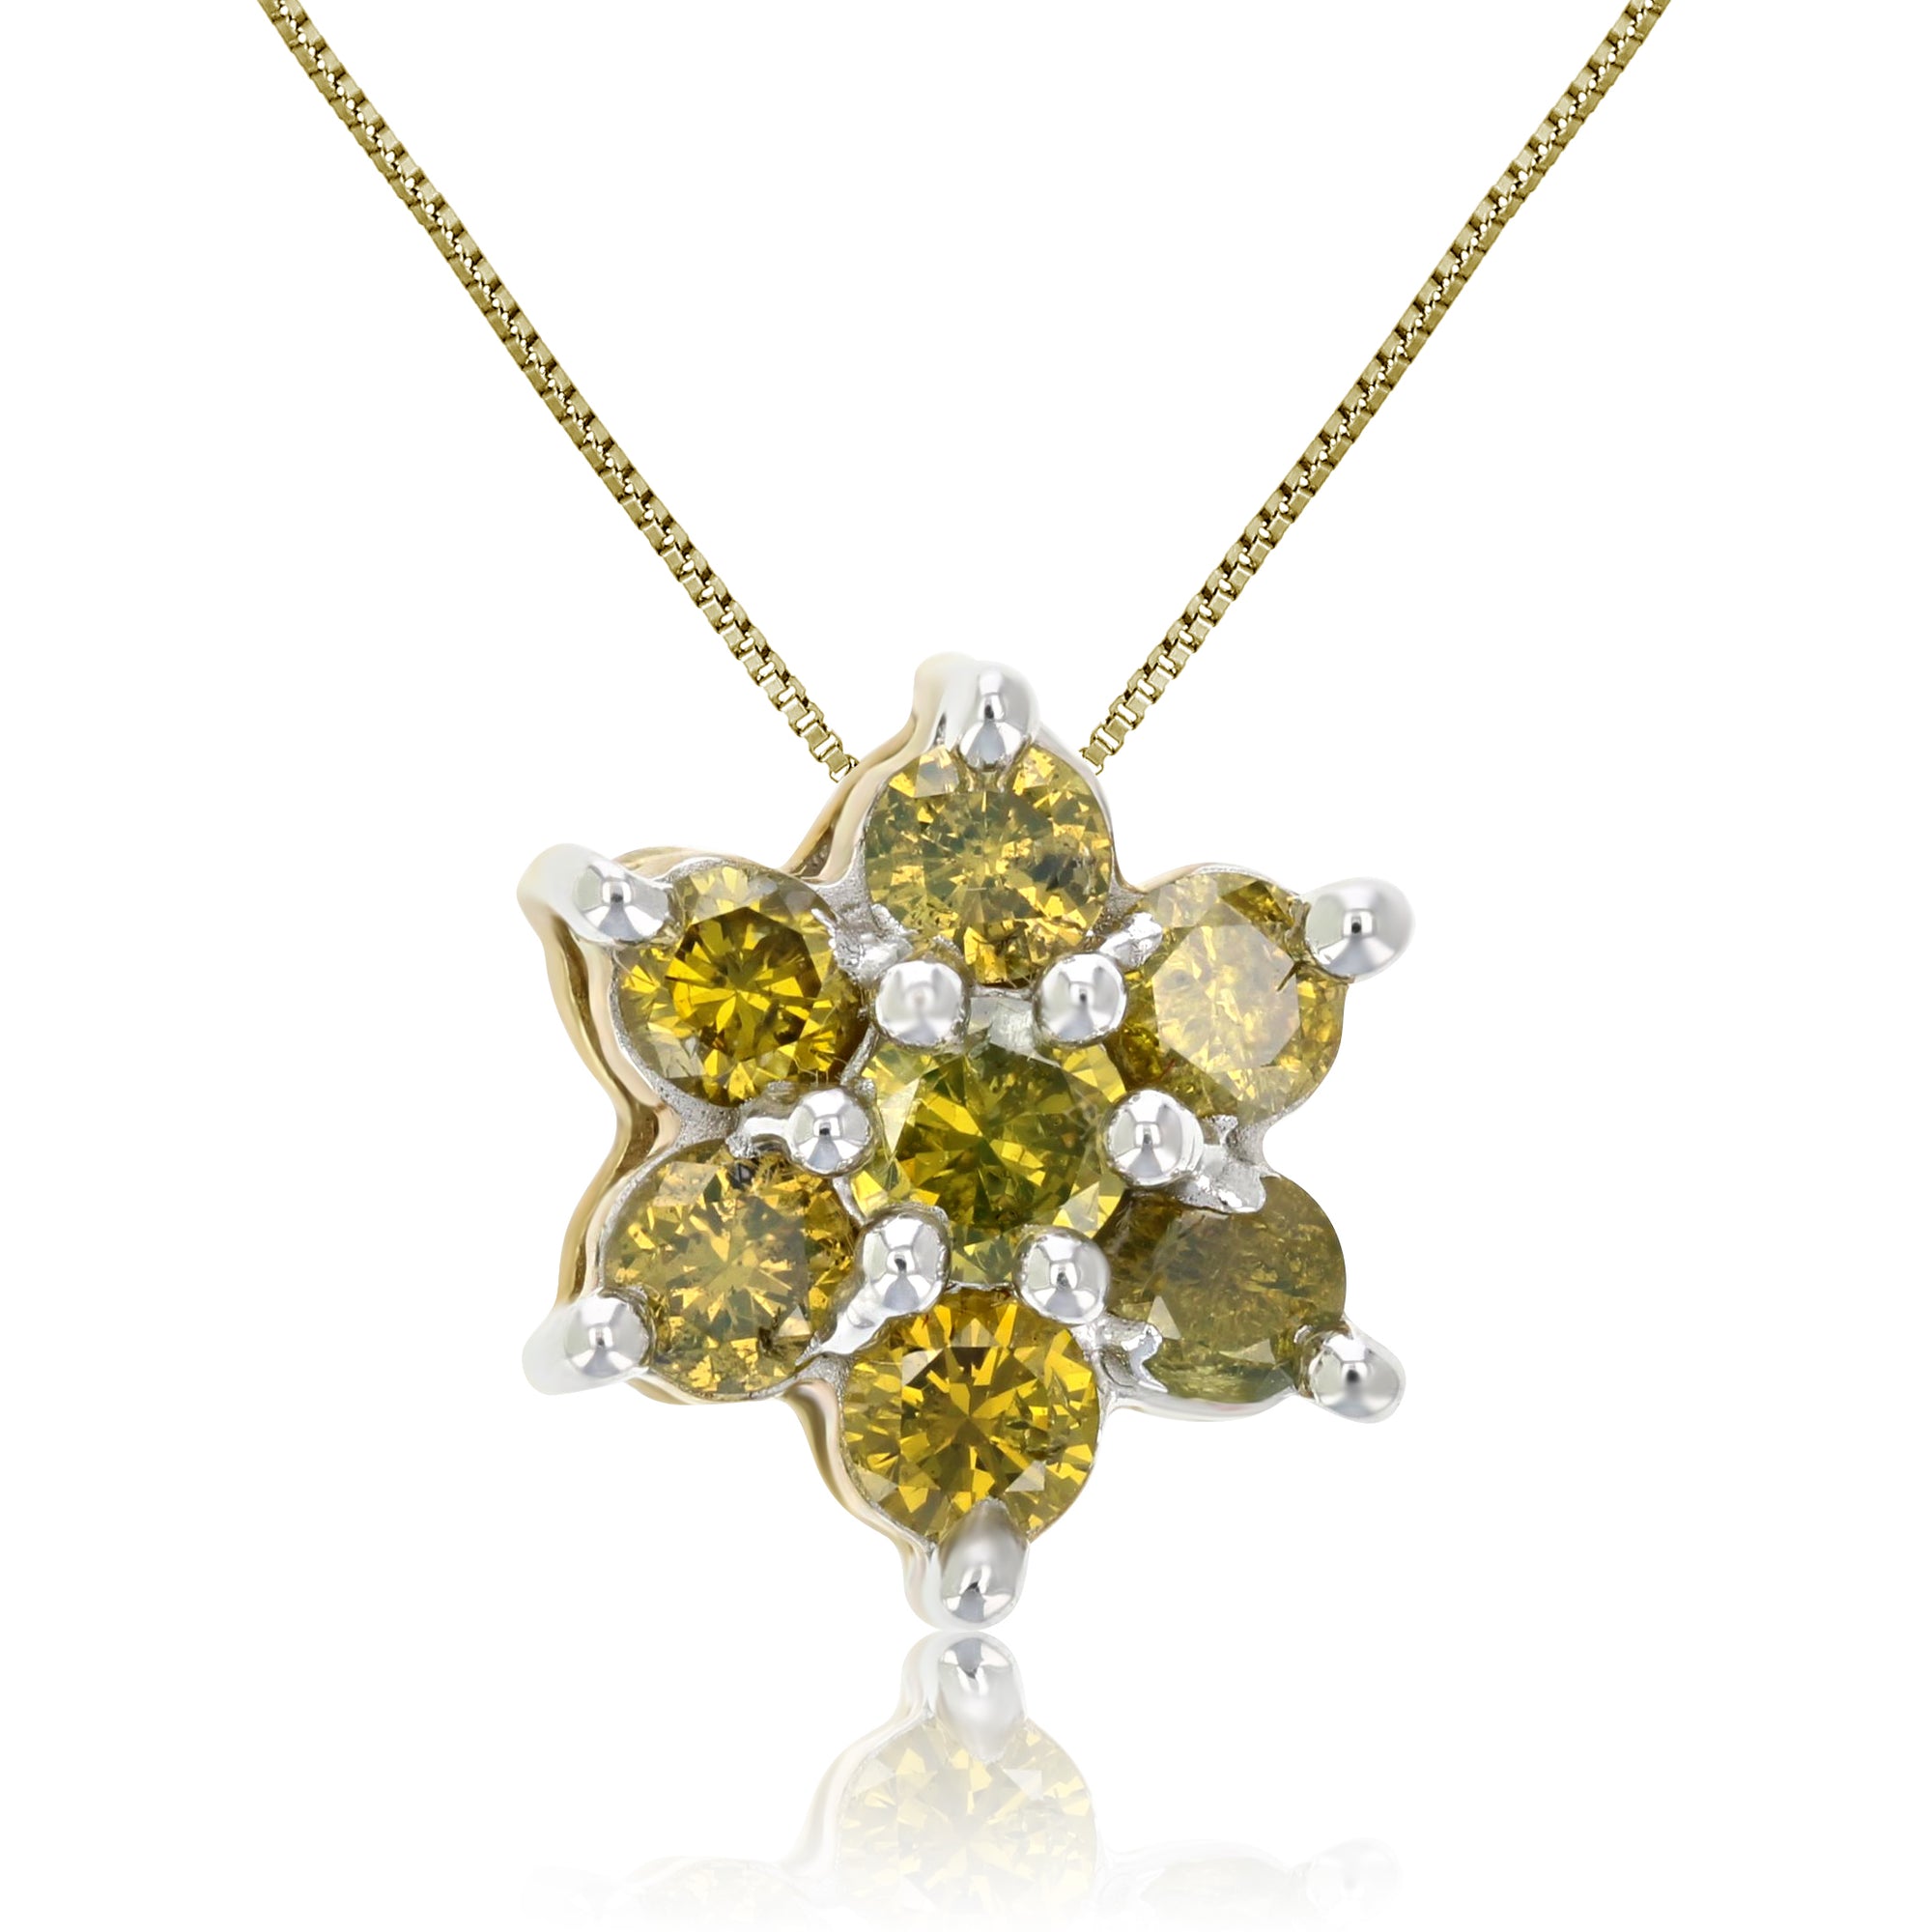 1/2 cttw Yellow Diamond Pendant, Yellow Diamond Cluster Composite Pendant Necklace for Women in 10K Yellow Gold with 18 Inch Chain, Prong Setting